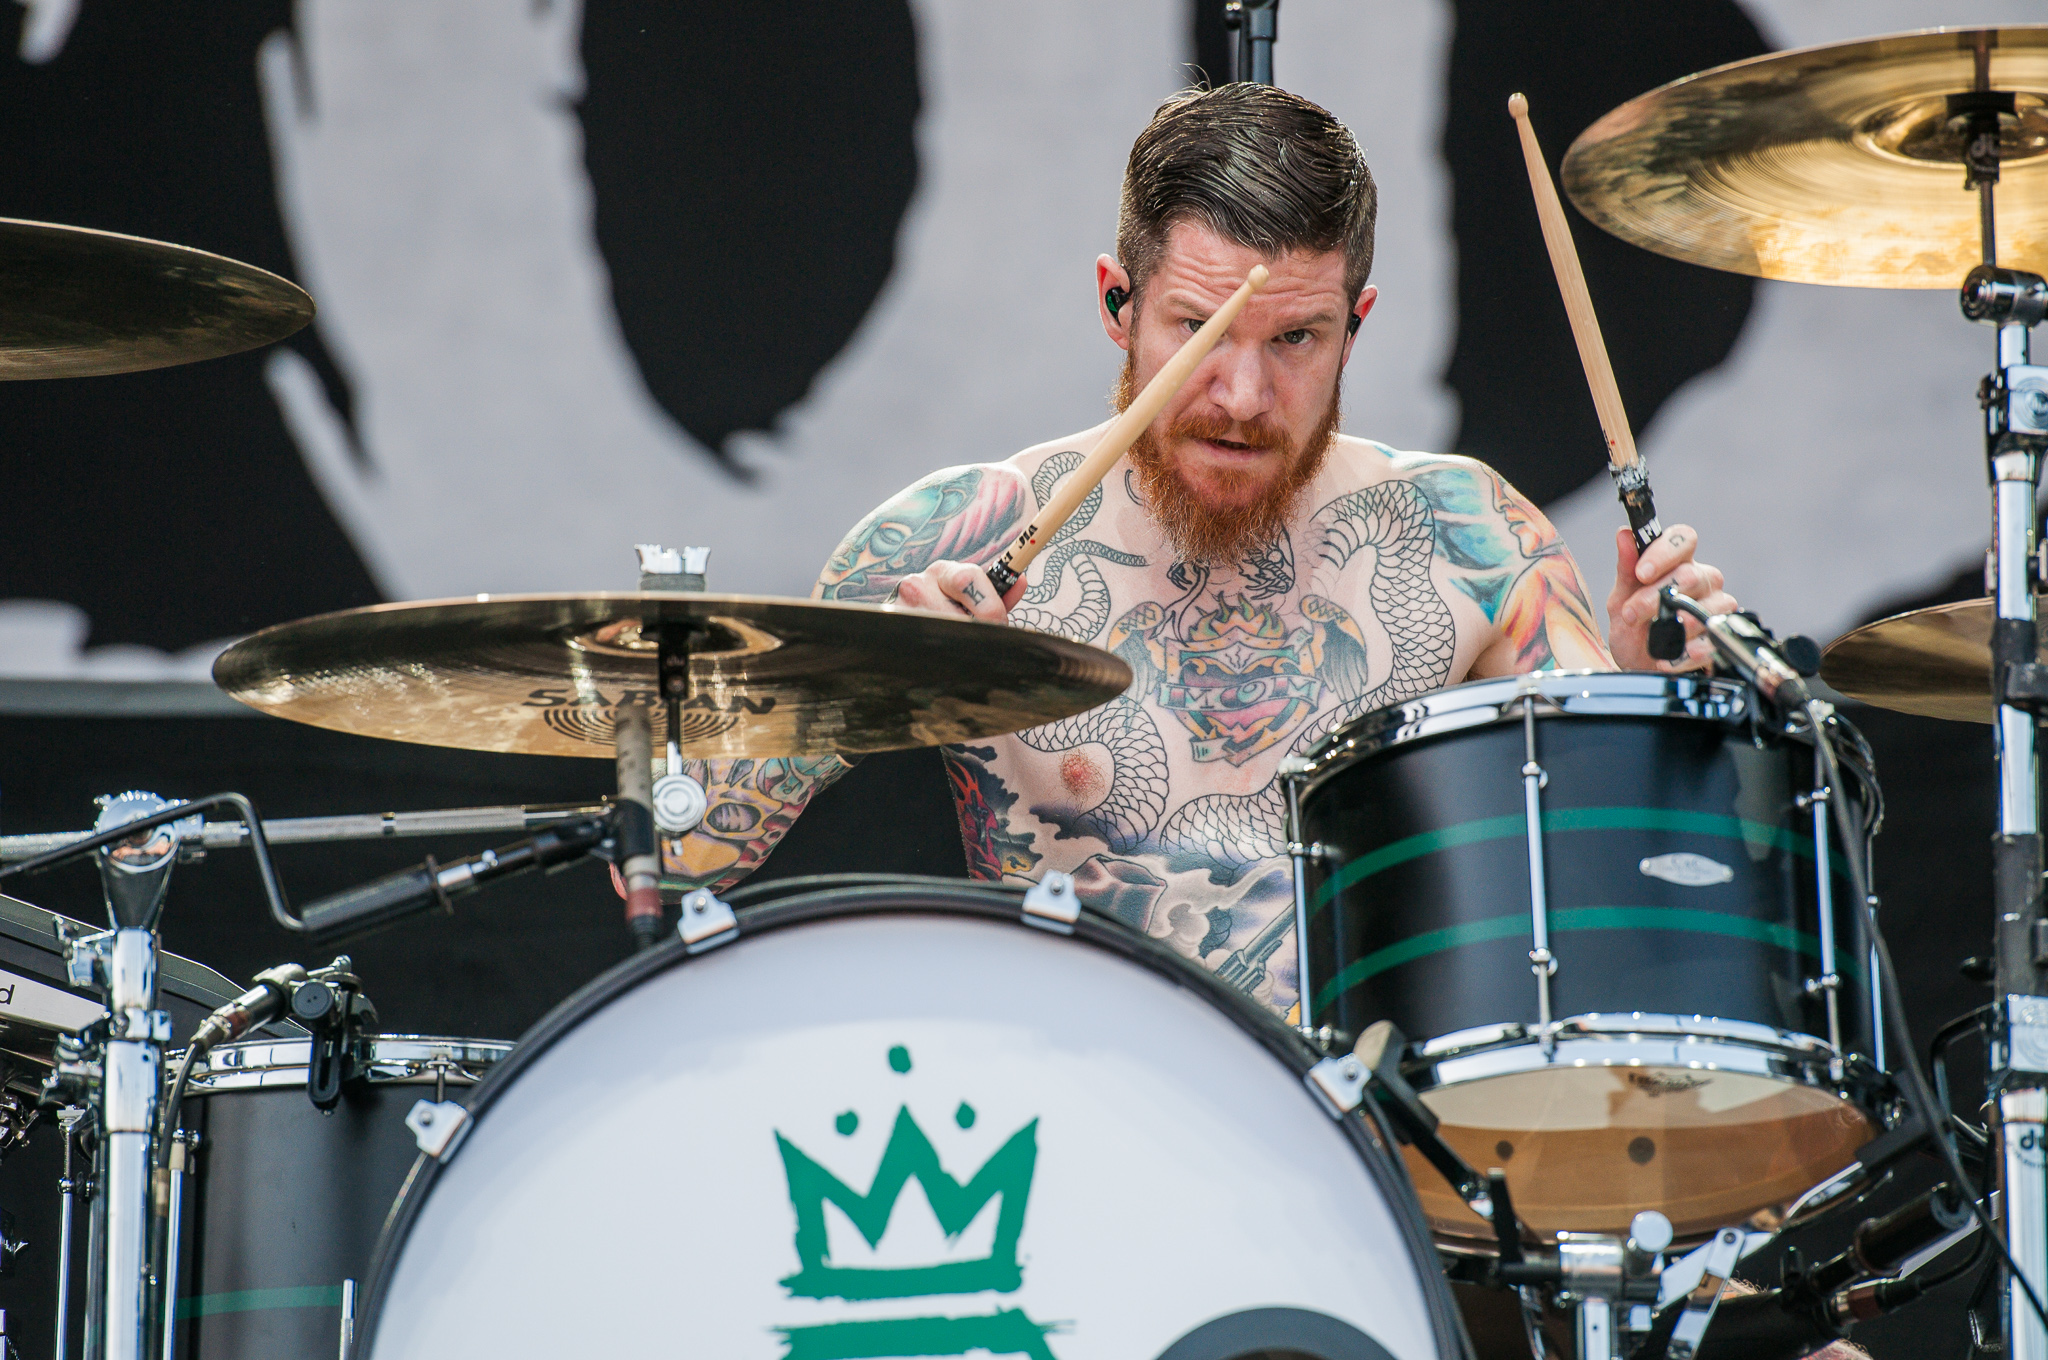 Happy Birthday to ANDY HURLEY American drummer who turns 40 today, May 31, 2020.  